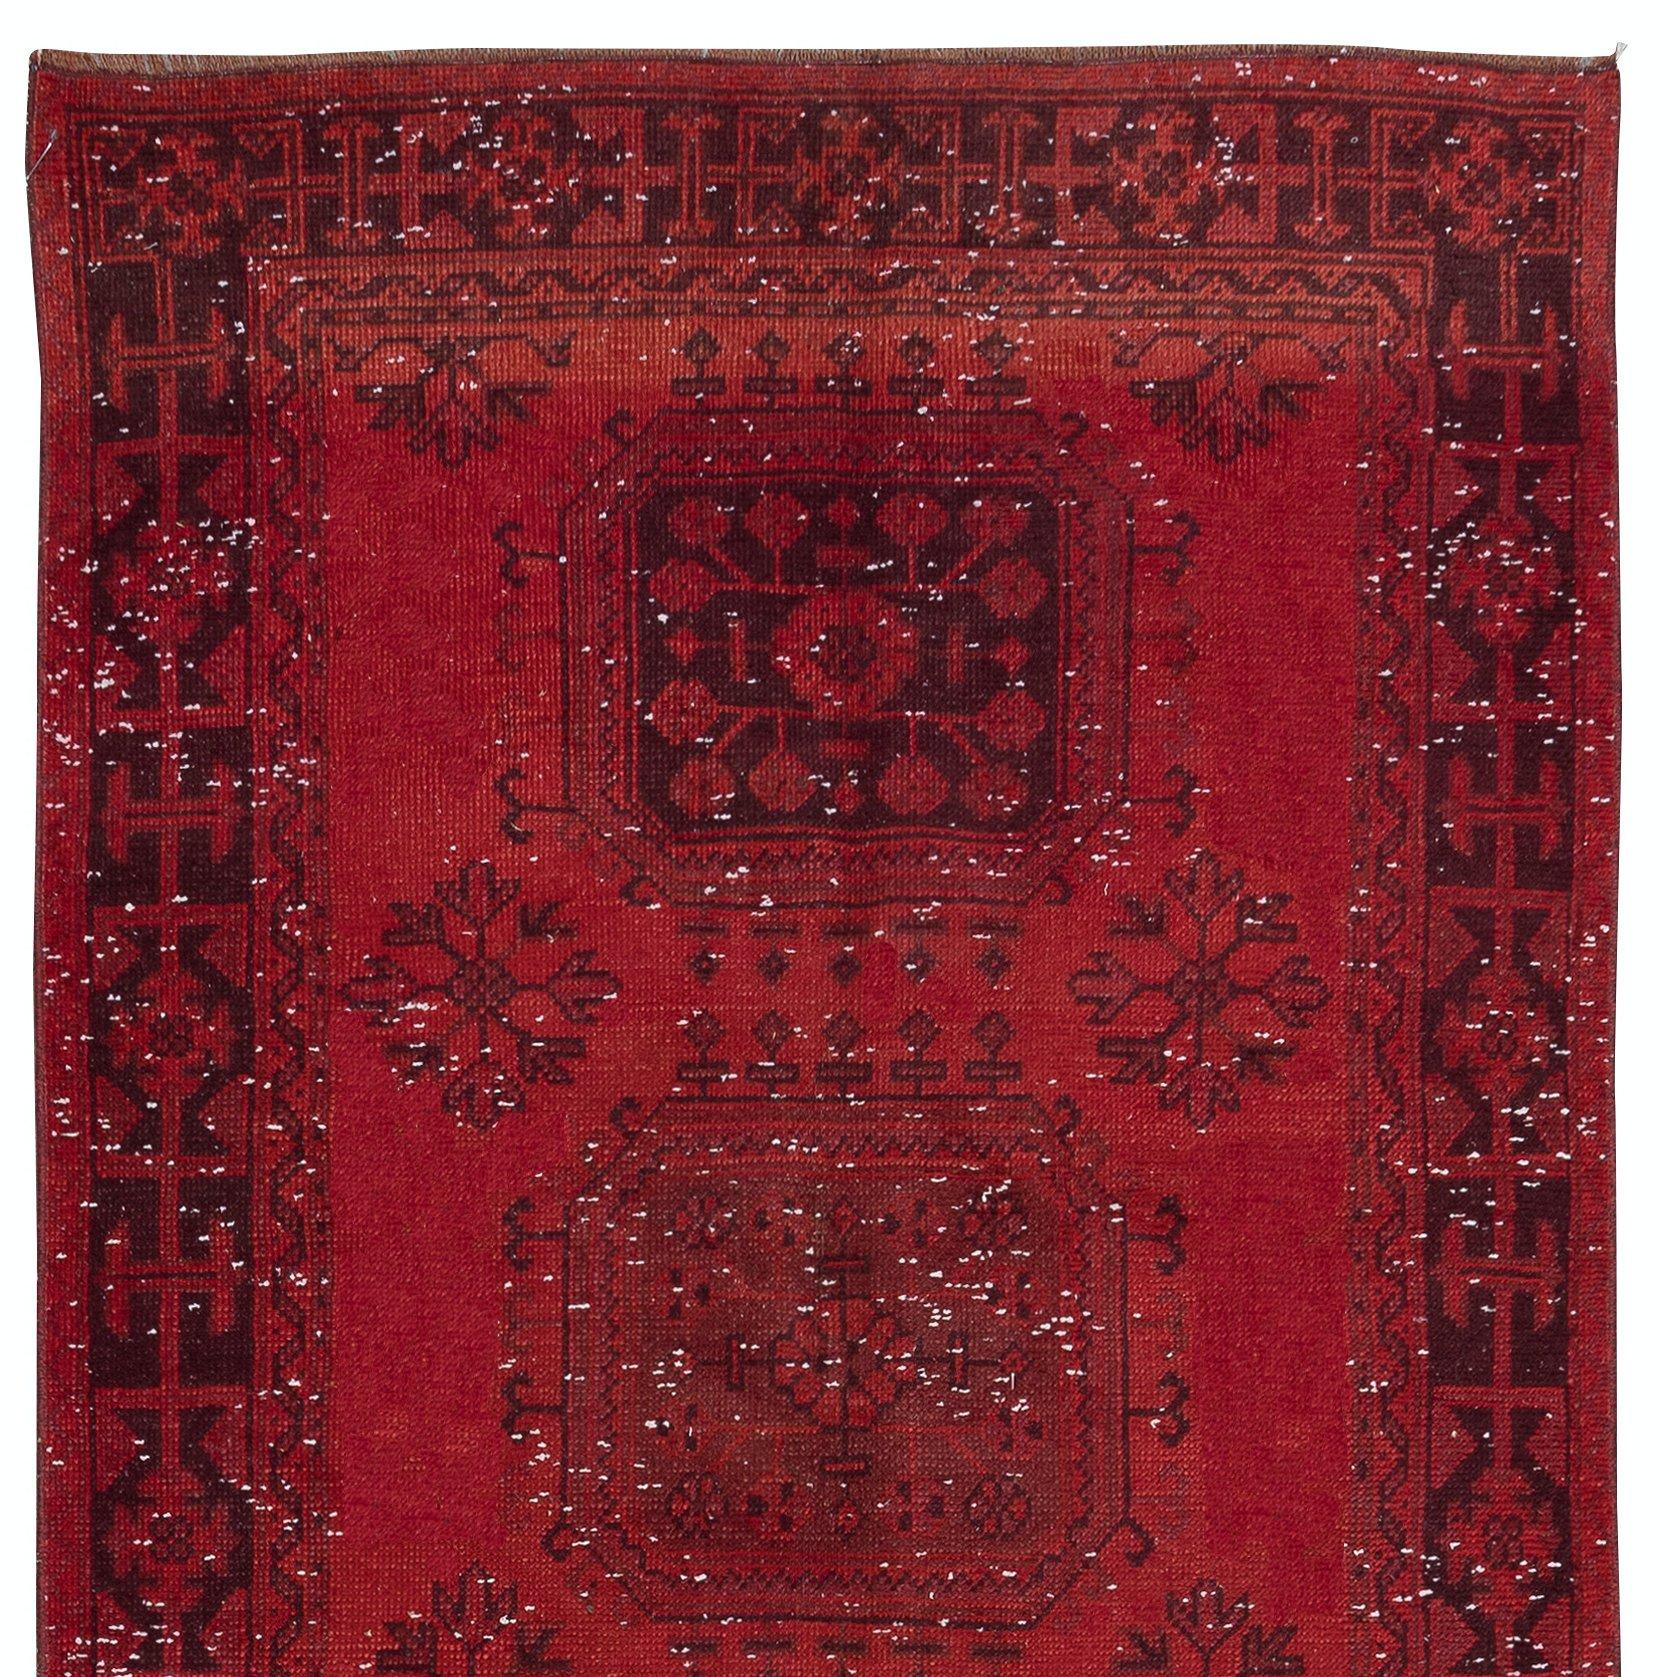 4x11.2 Ft Hand Knotted Runner Rug. Modern Turkish Hallway Carpet in Dark Red In Good Condition For Sale In Philadelphia, PA